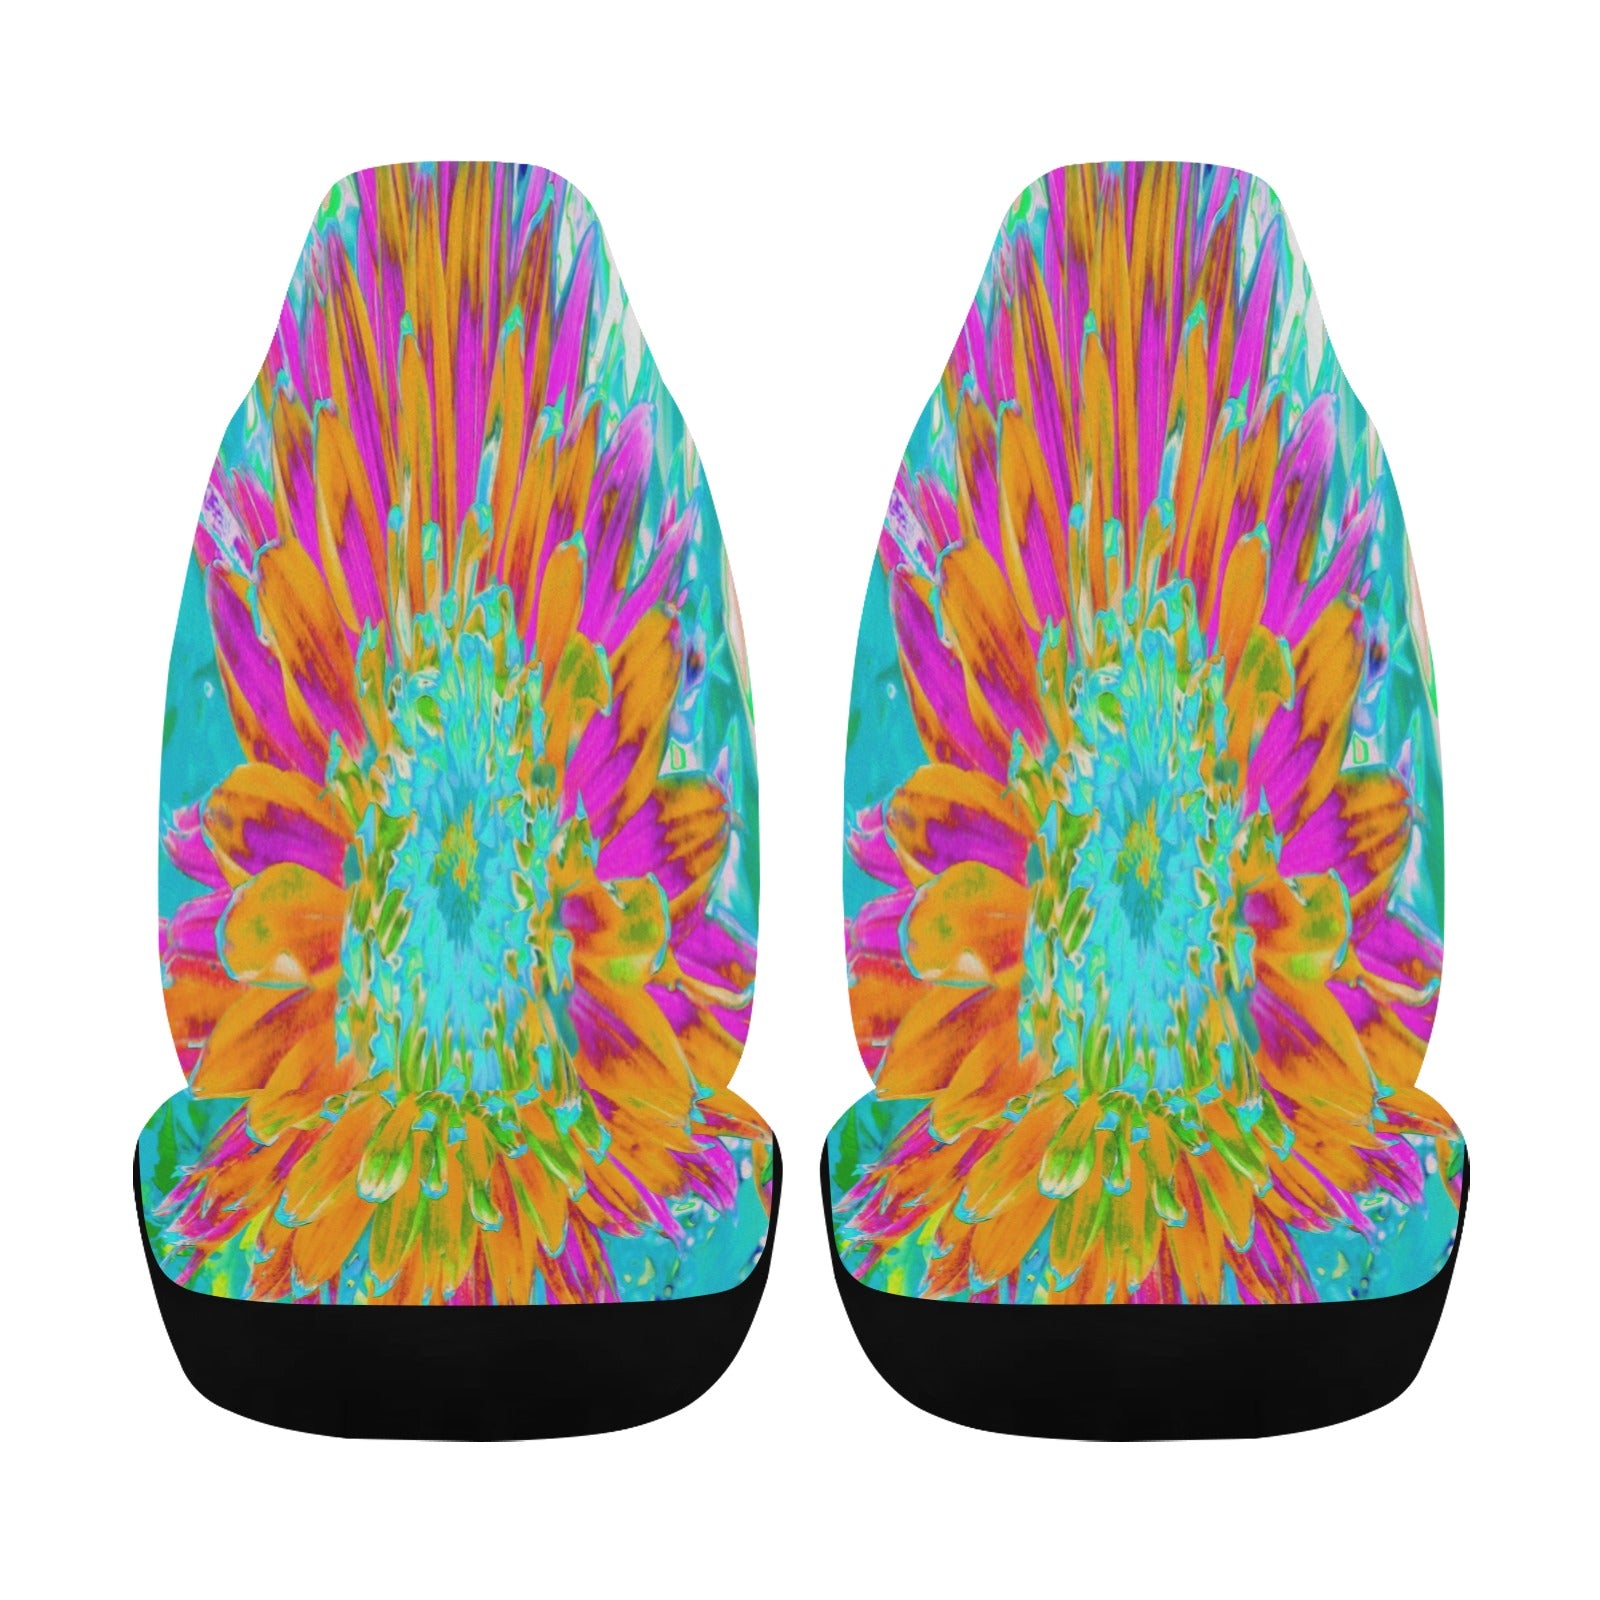 Colorful Floral Car Seat Covers, Tropical Orange and Hot Pink Decorative Dahlia